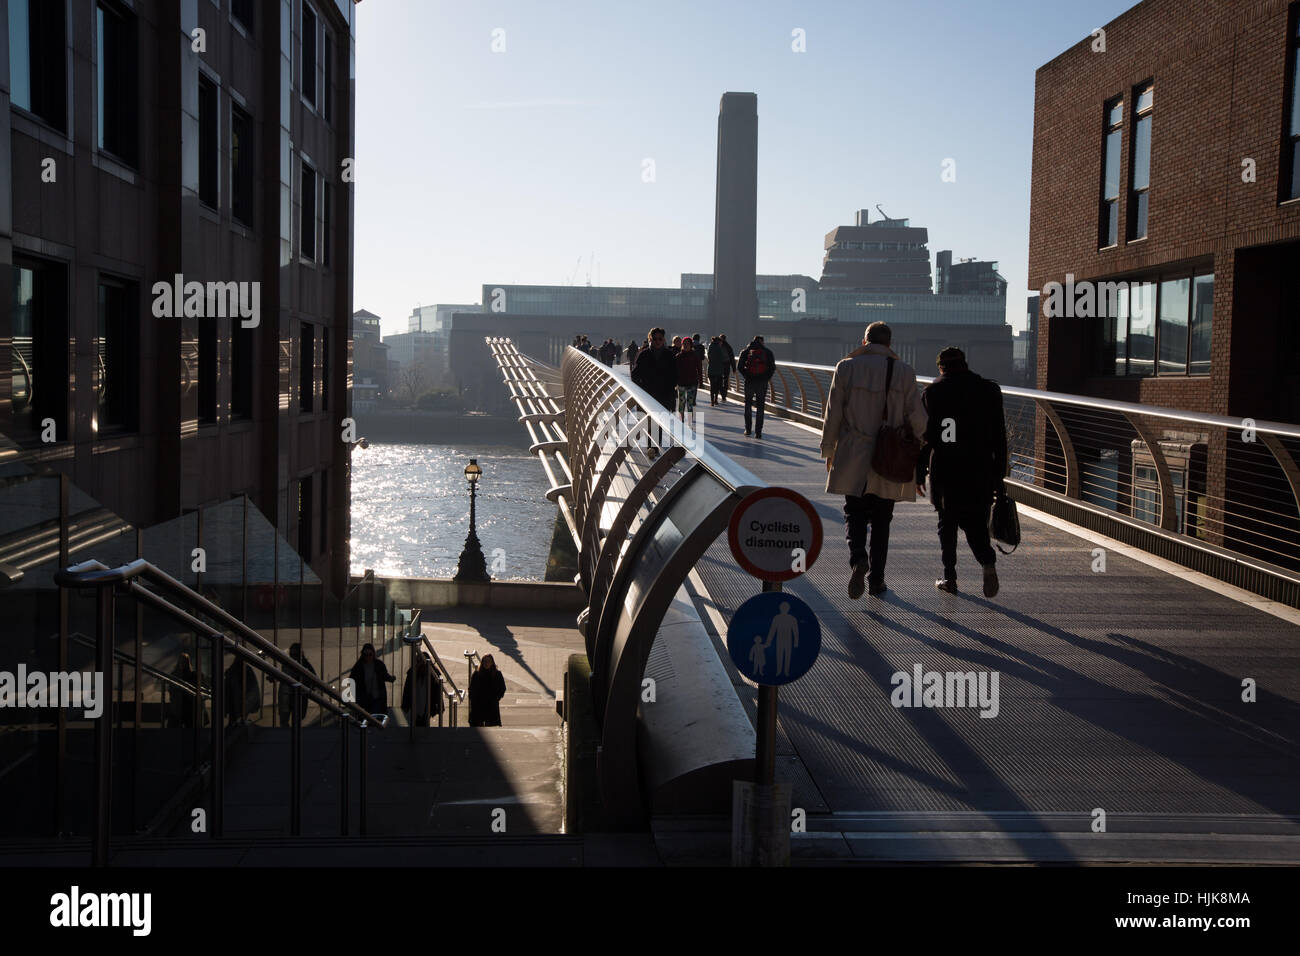 Scenes of the Millennium Bridge, looking south towards Bankside & Tate Modern, River Thames, in London, England, UK. Stock Photo